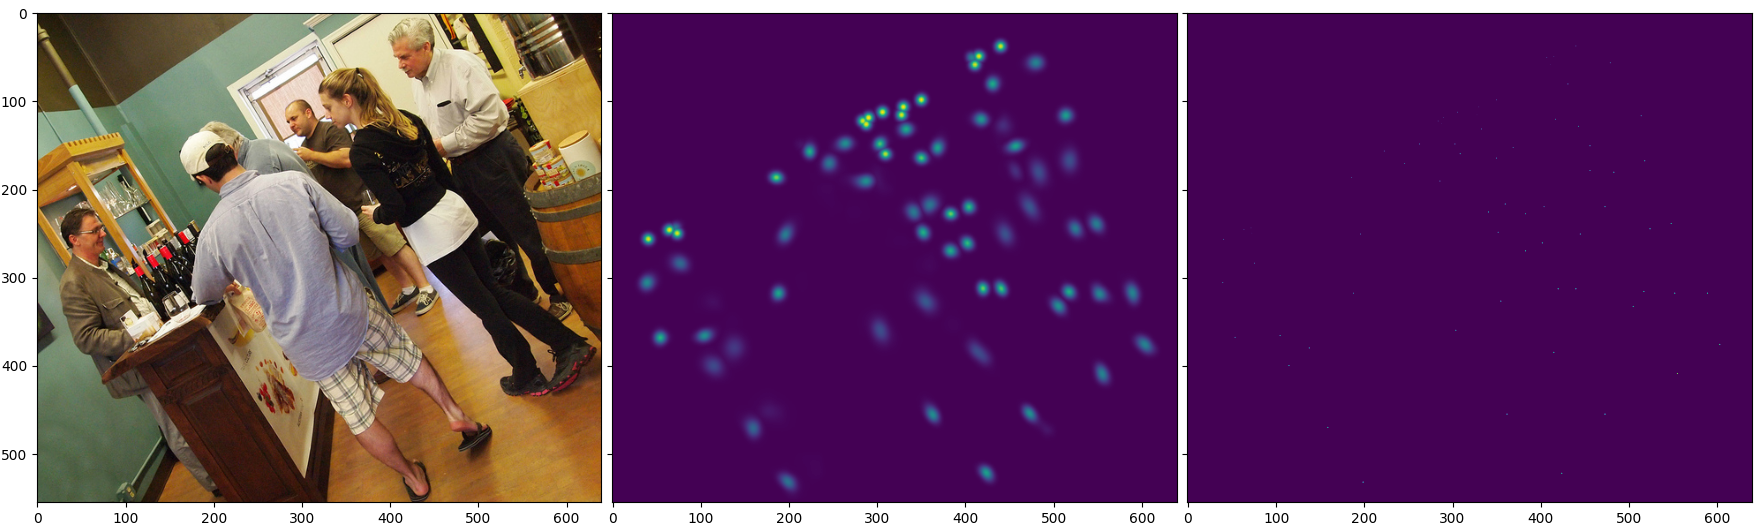 An image from the COCO datset with multiple people, and the corresponding keypoint predictions.